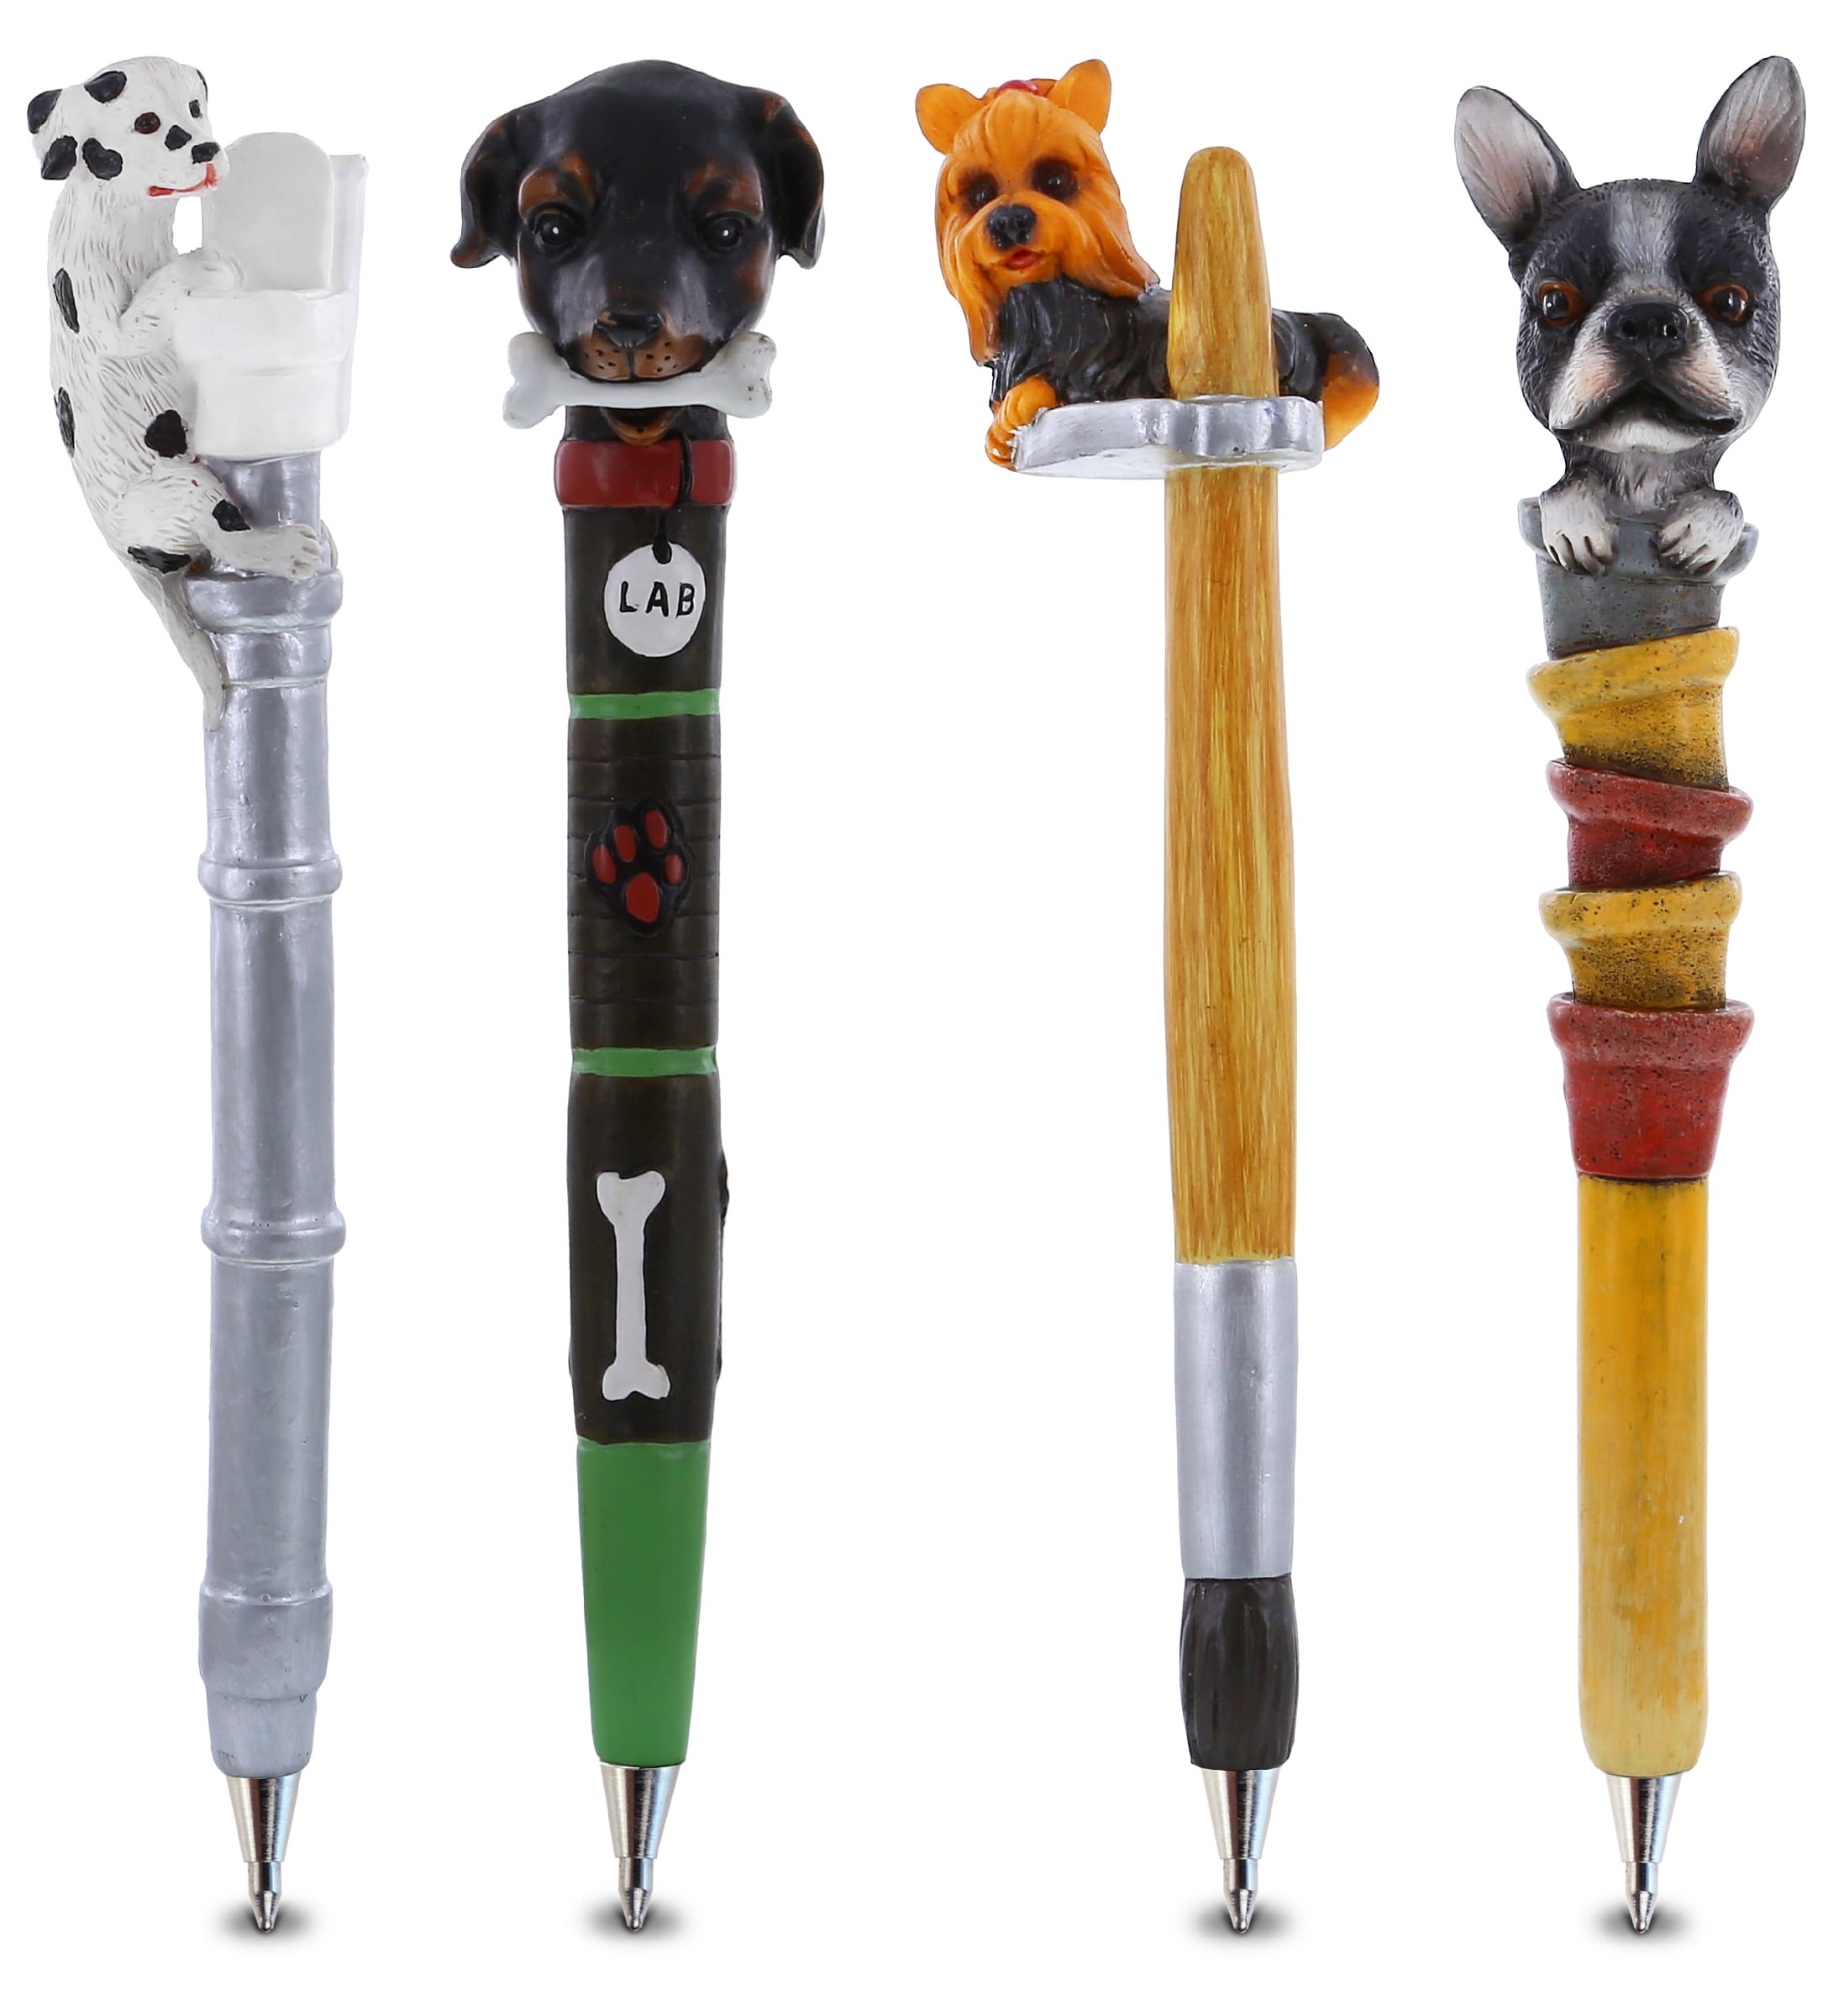 Wholesale Fun Racing Car Mini Ballpoint Pen For Kids Novelty Writing  Supplies And Painting Supples, Cute And Interesting Party Favors For Boys  From Dianz, $0.81